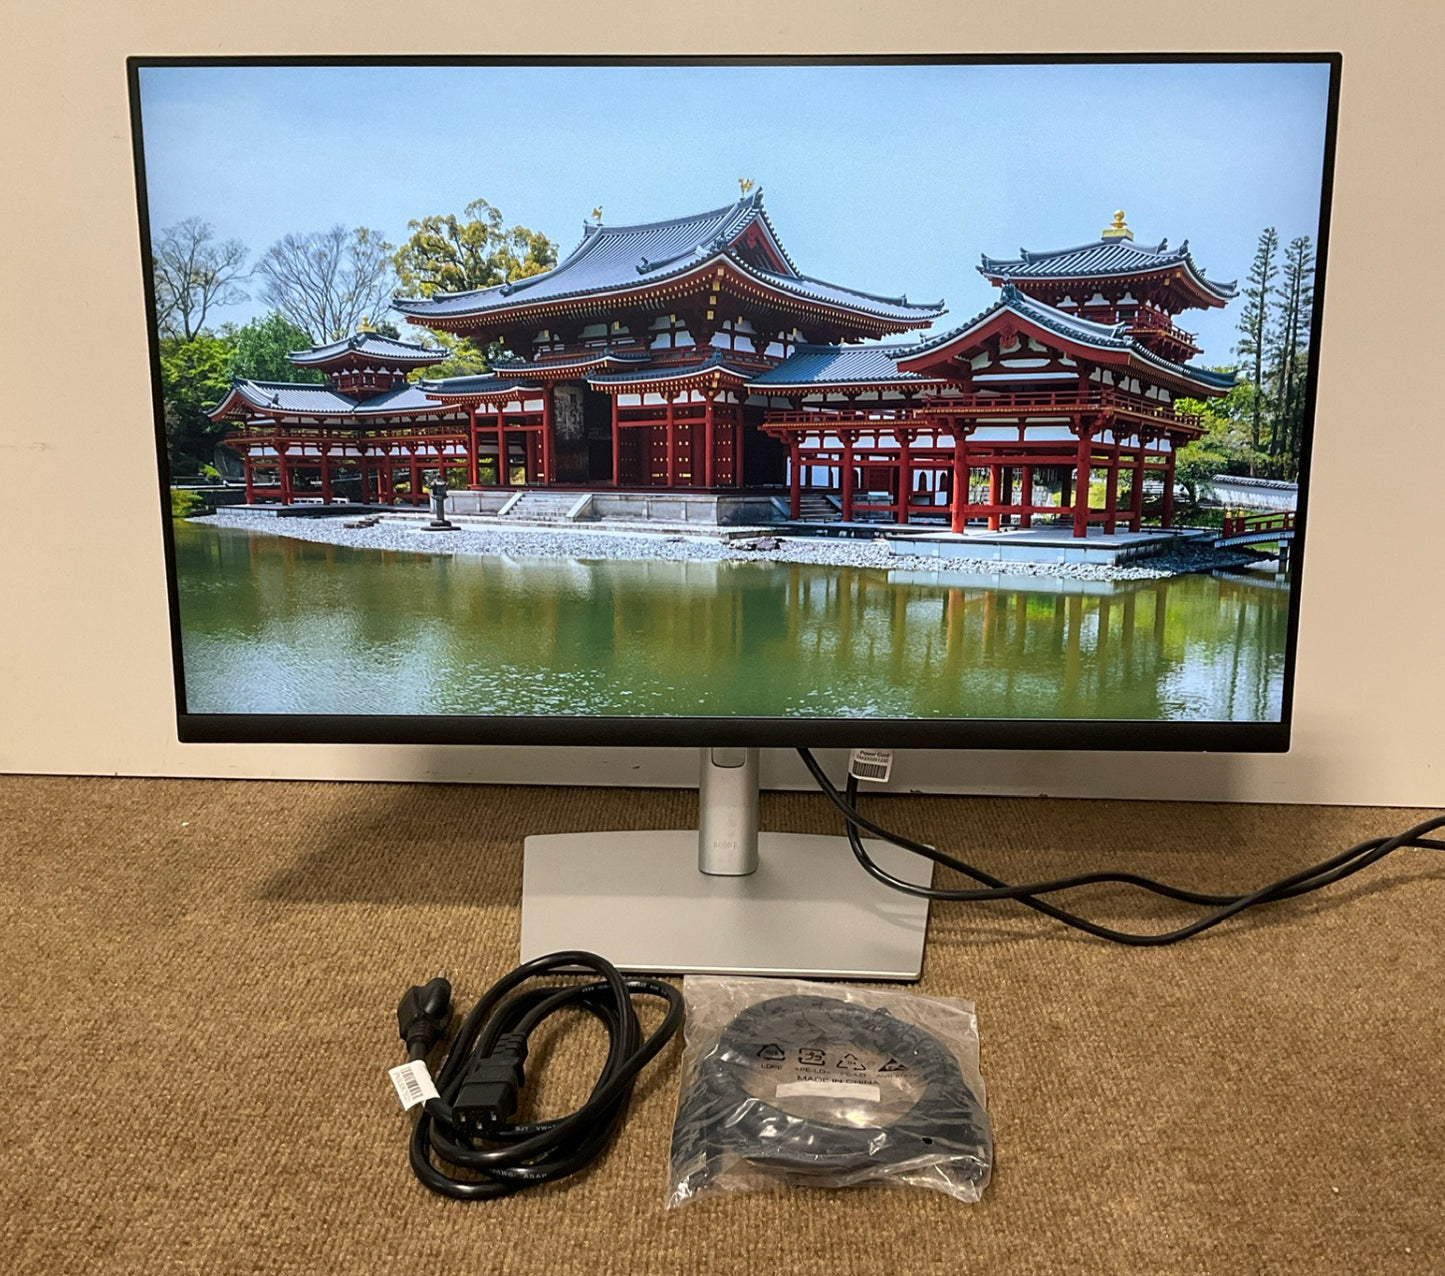 ♥ New, Open Box - Dell P2722HE 27" 16:9 FHD 1920 x 1080 USB Type-C IPS Monitor